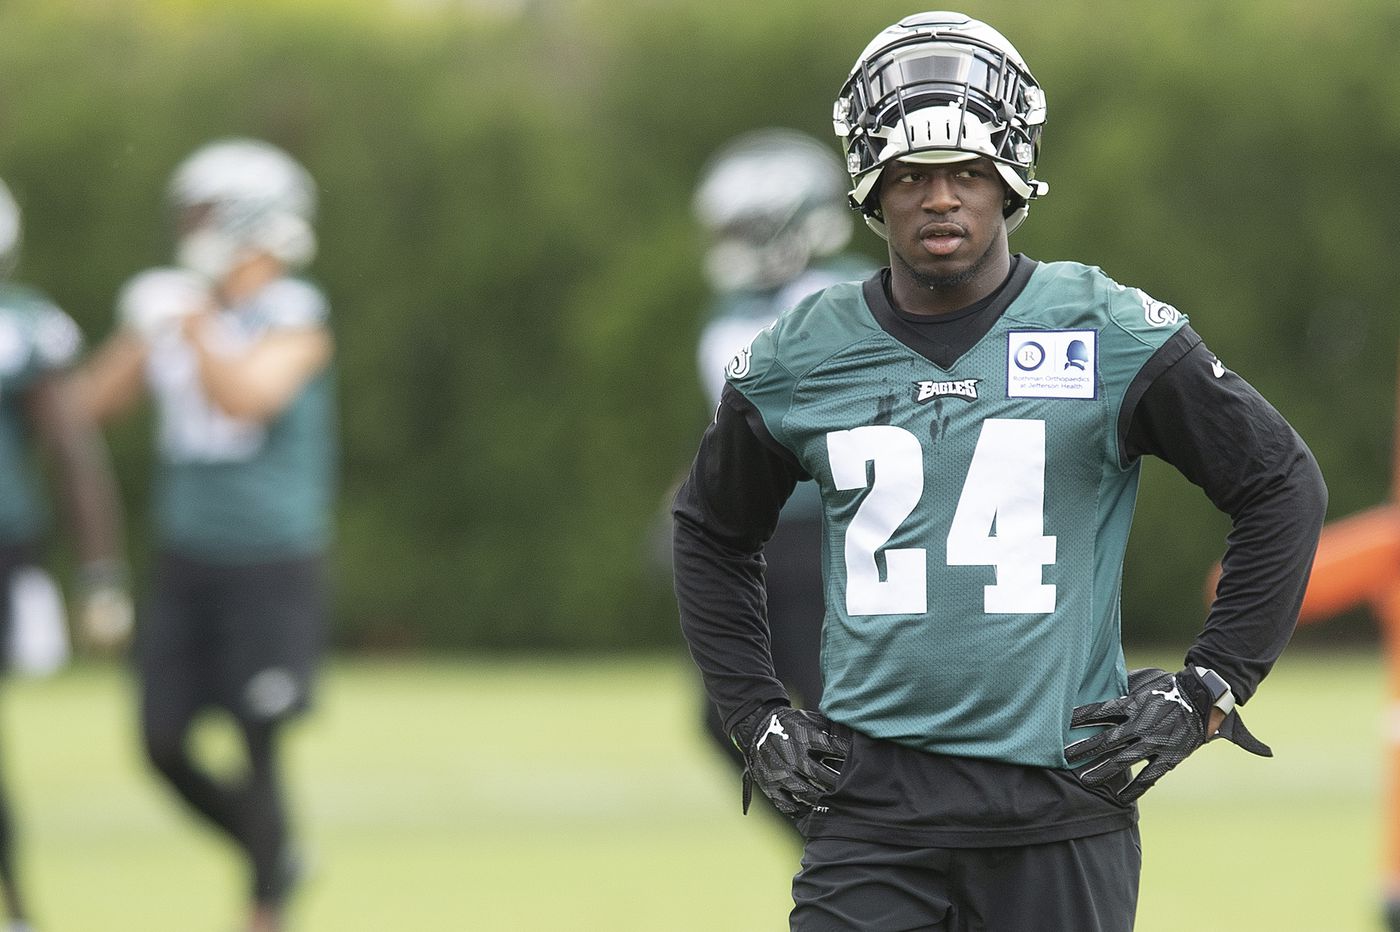 Jordan Howard catching on in Philadelphia, expects to be used